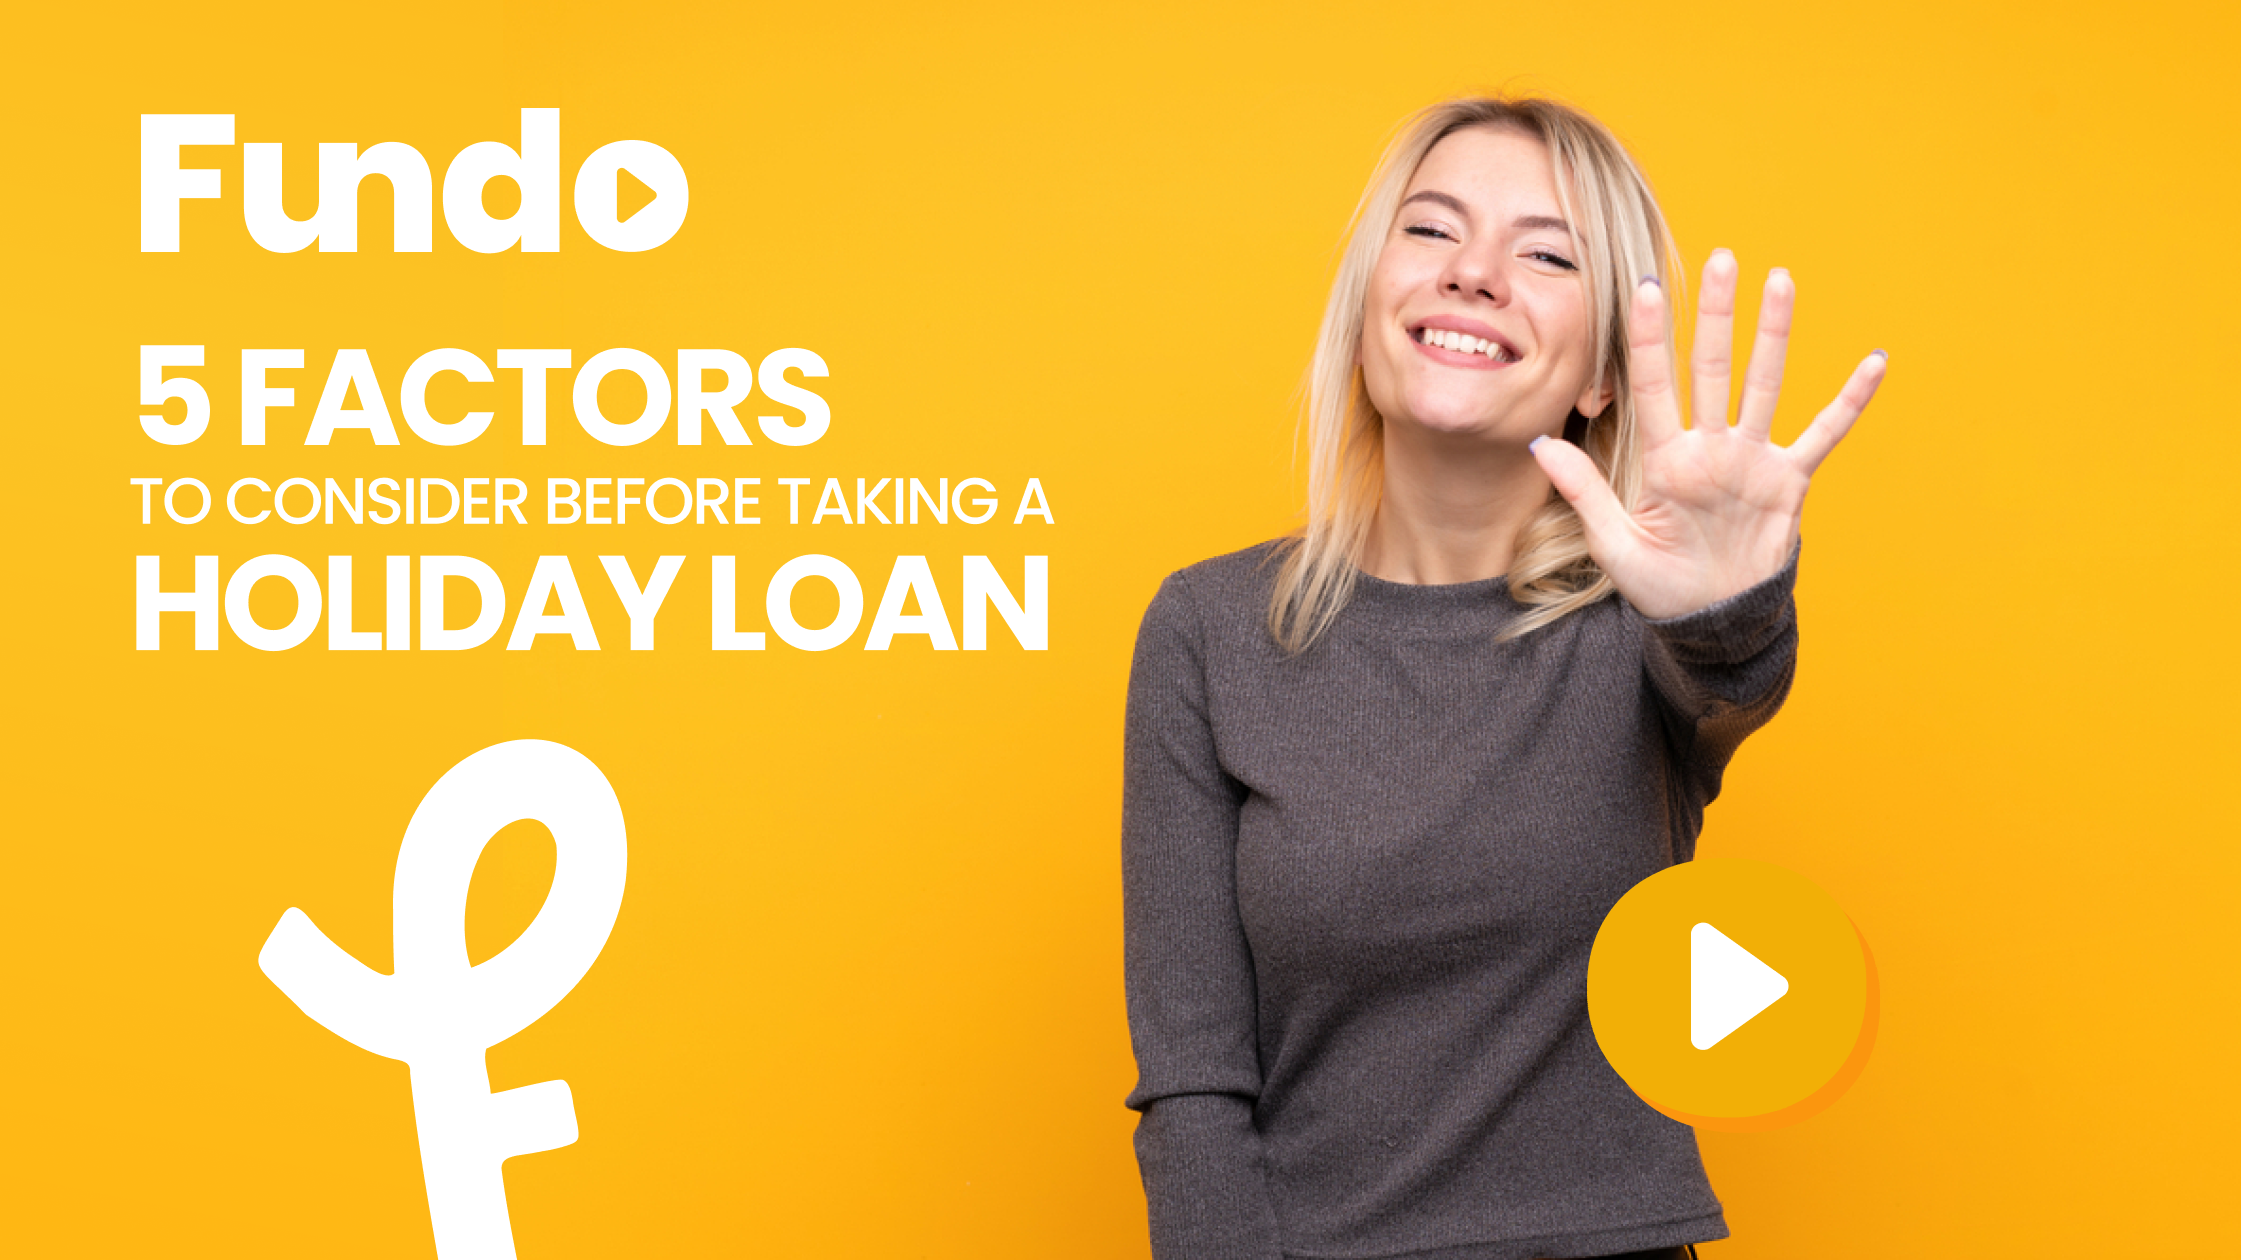 5 factors to consider before taking a holiday loan